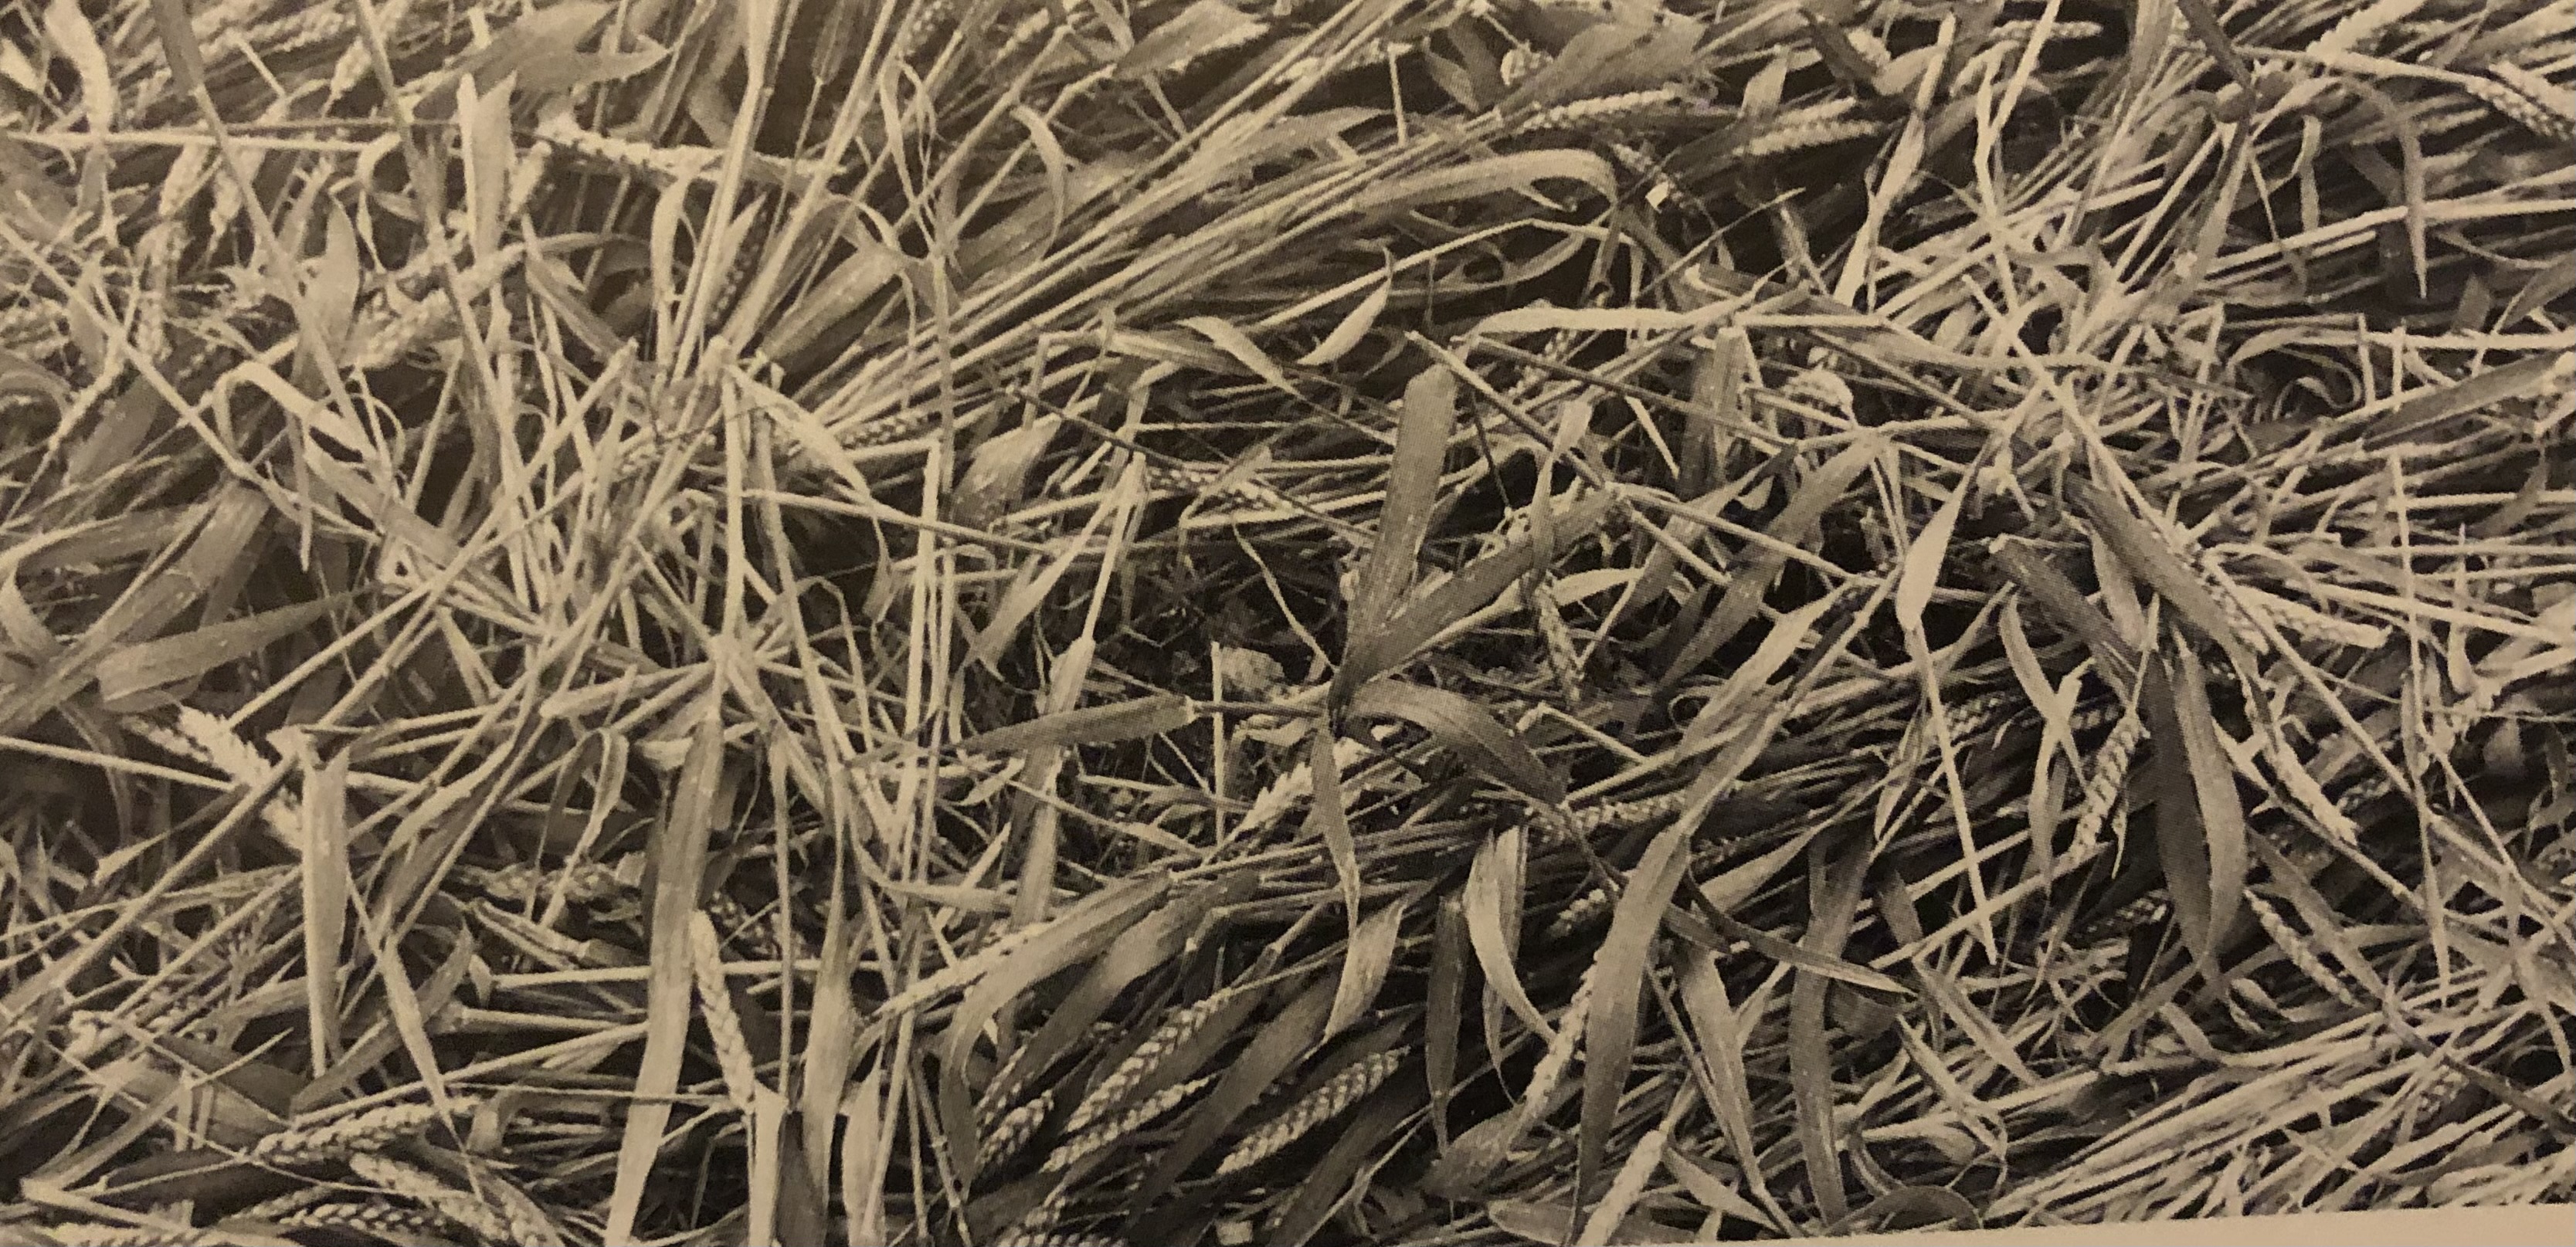 A sepia photograph depicting an up close aerial shot disturbed swirling flattened wheat stalks.